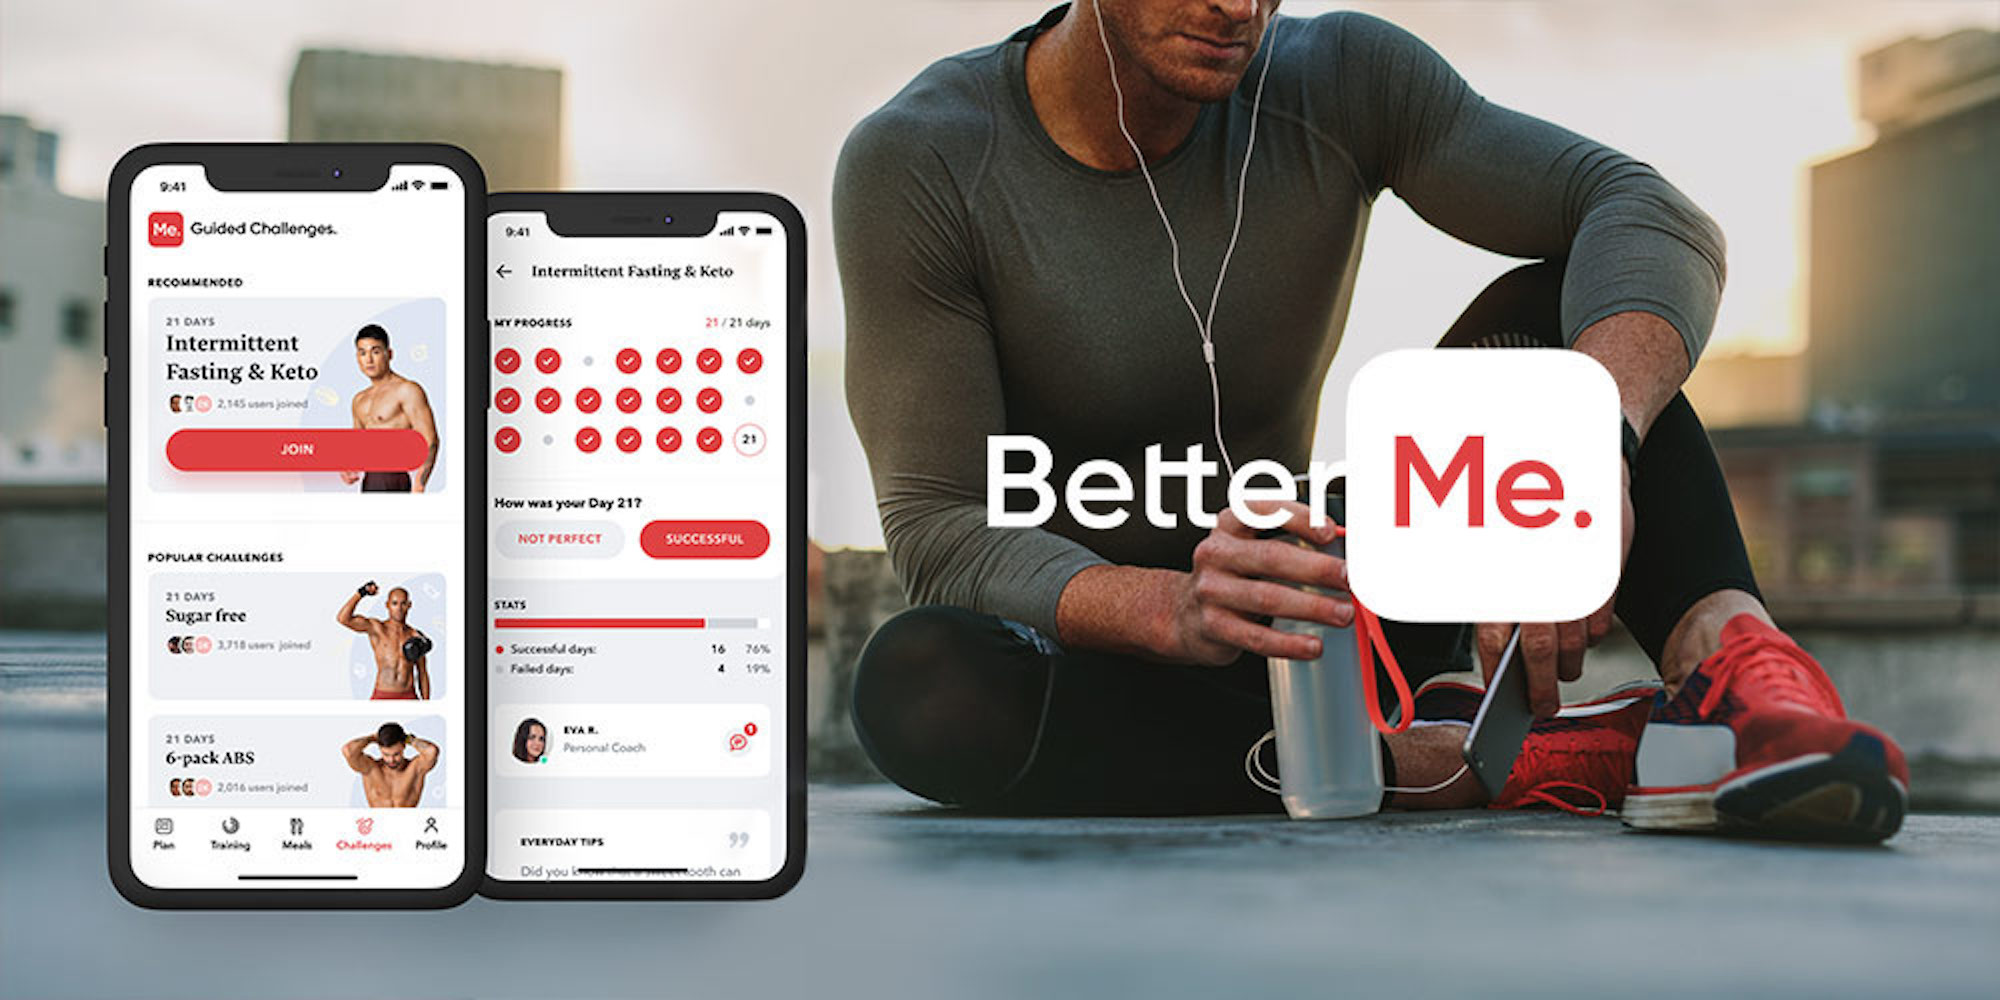 Get personalized workouts and meal plans with one year of BetterMe for $20  - 9to5Toys